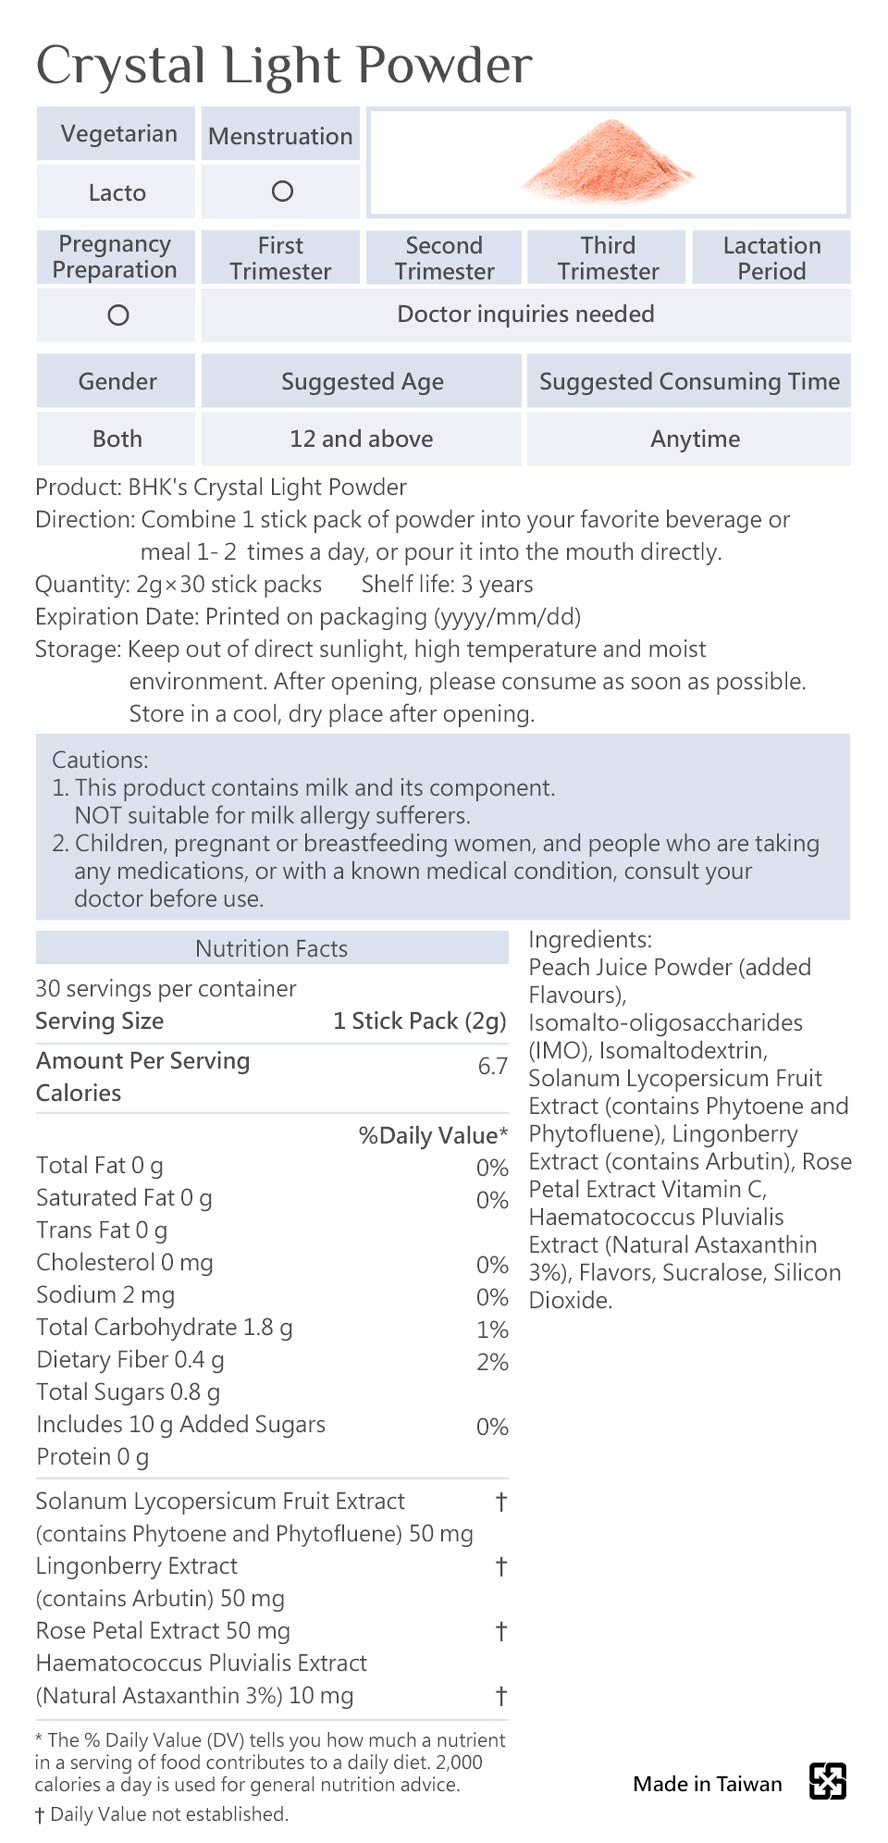 Effectively suBHK's promises you high quality pure material, passed Taiwan's regulation and safety test. This product contains milk and its component, not suitable for those with allergies